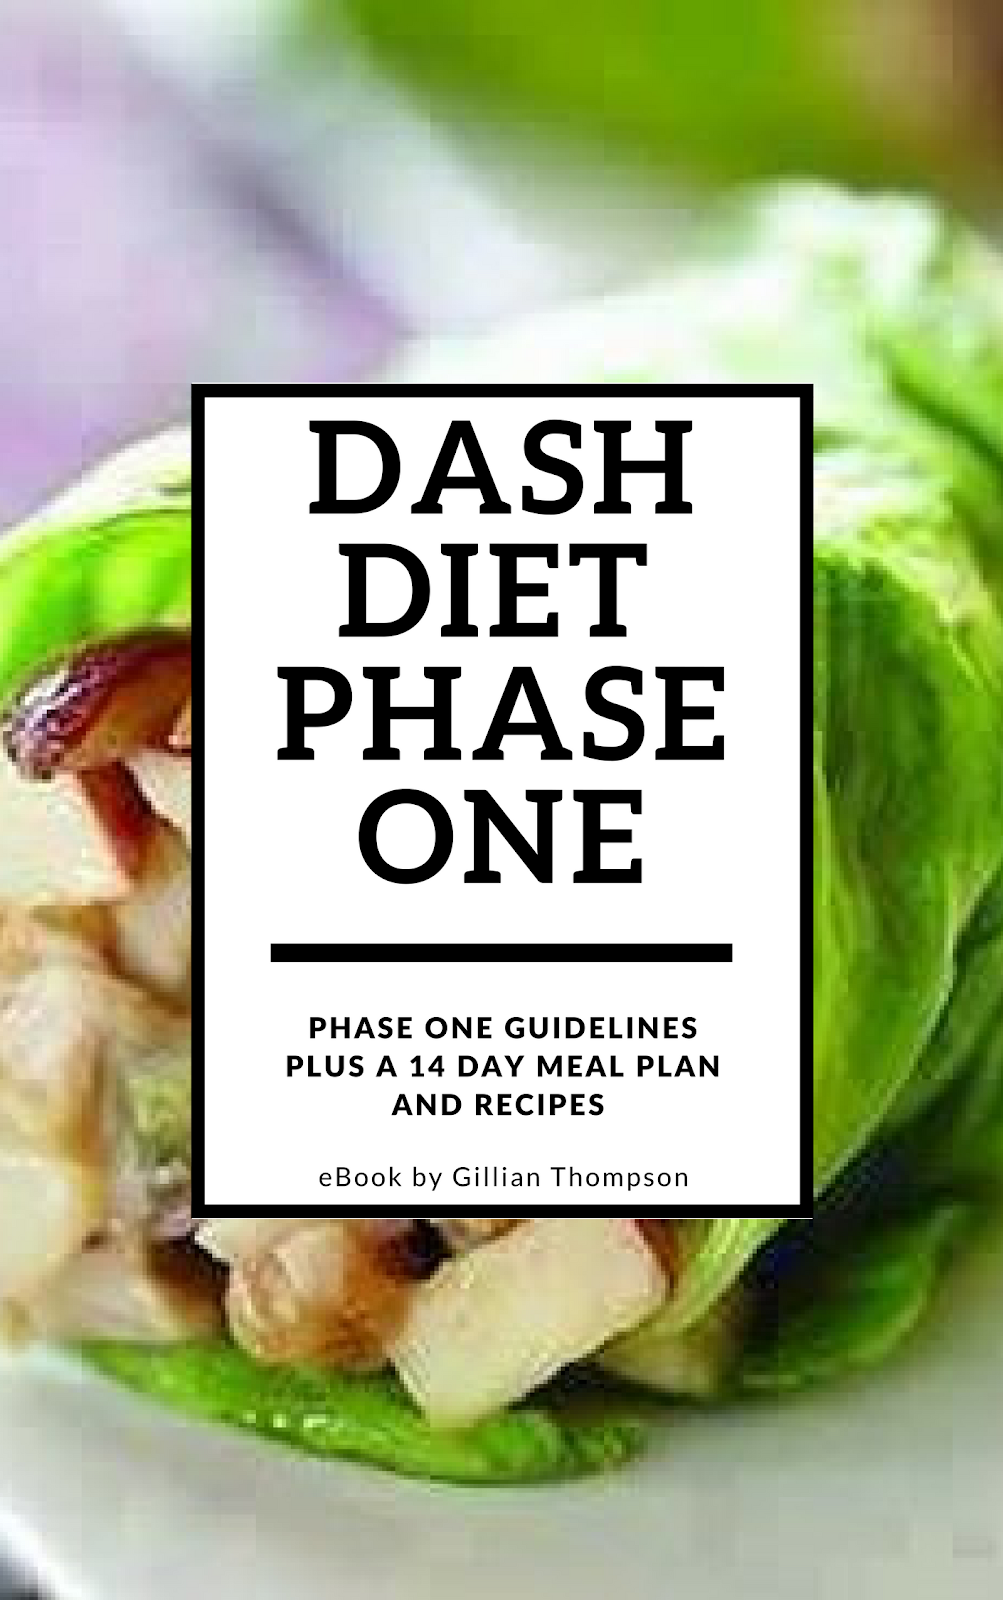 Dash Diet Phase One Meal Plan and Recipes